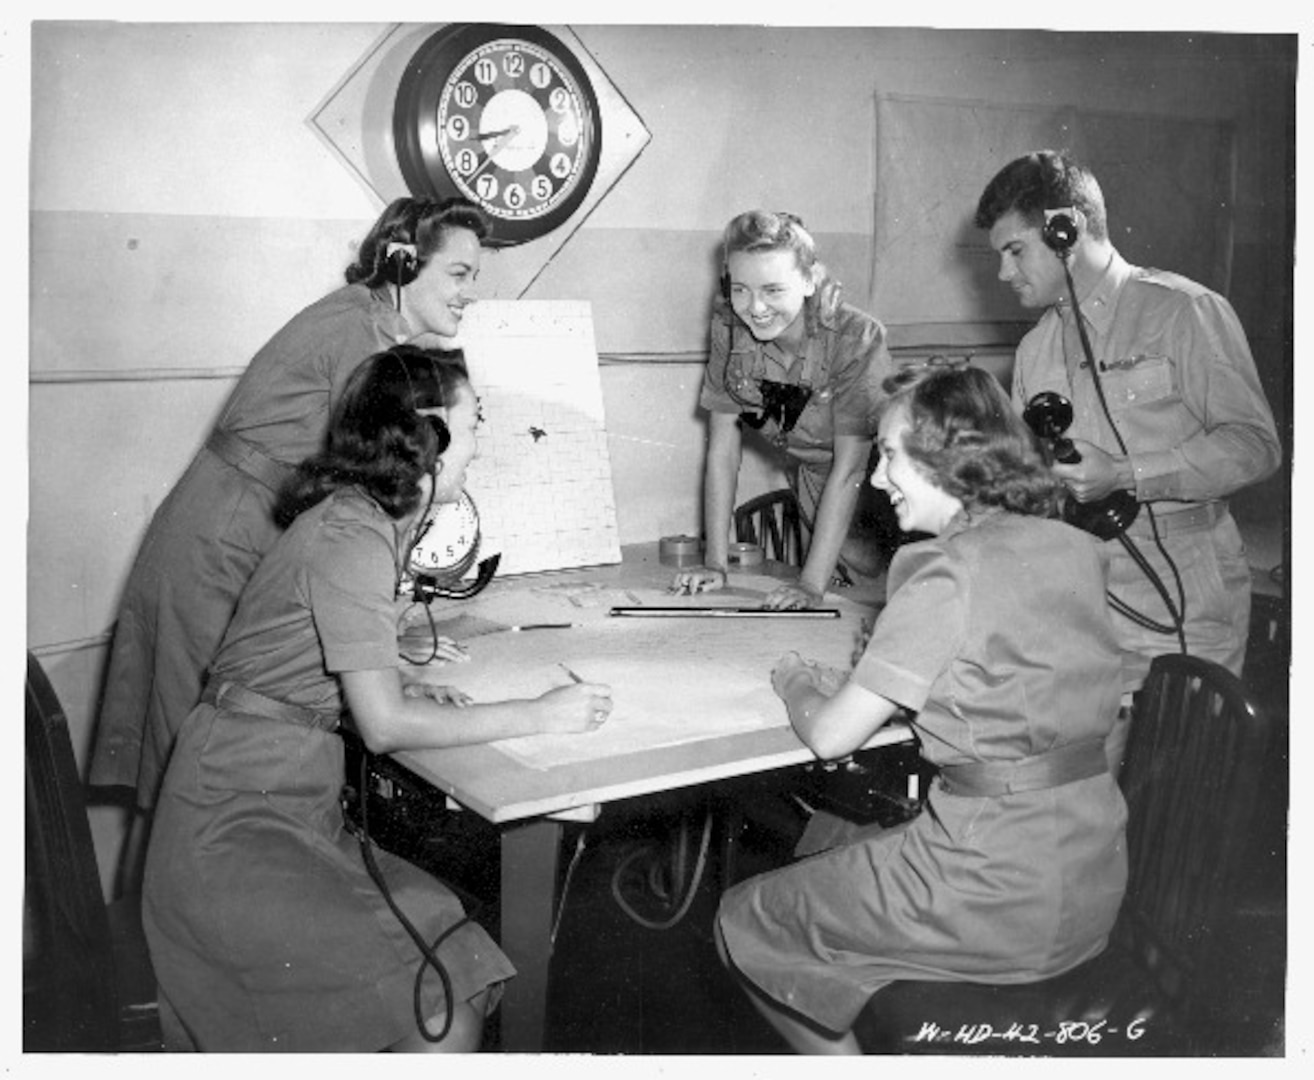 After completing their training, The Women's Air Raid Defense recruits worked tirelessly, staffing the air defense center 24/7 from a tunnel known as “Lizard” or building 1492 at Fort Shafter.